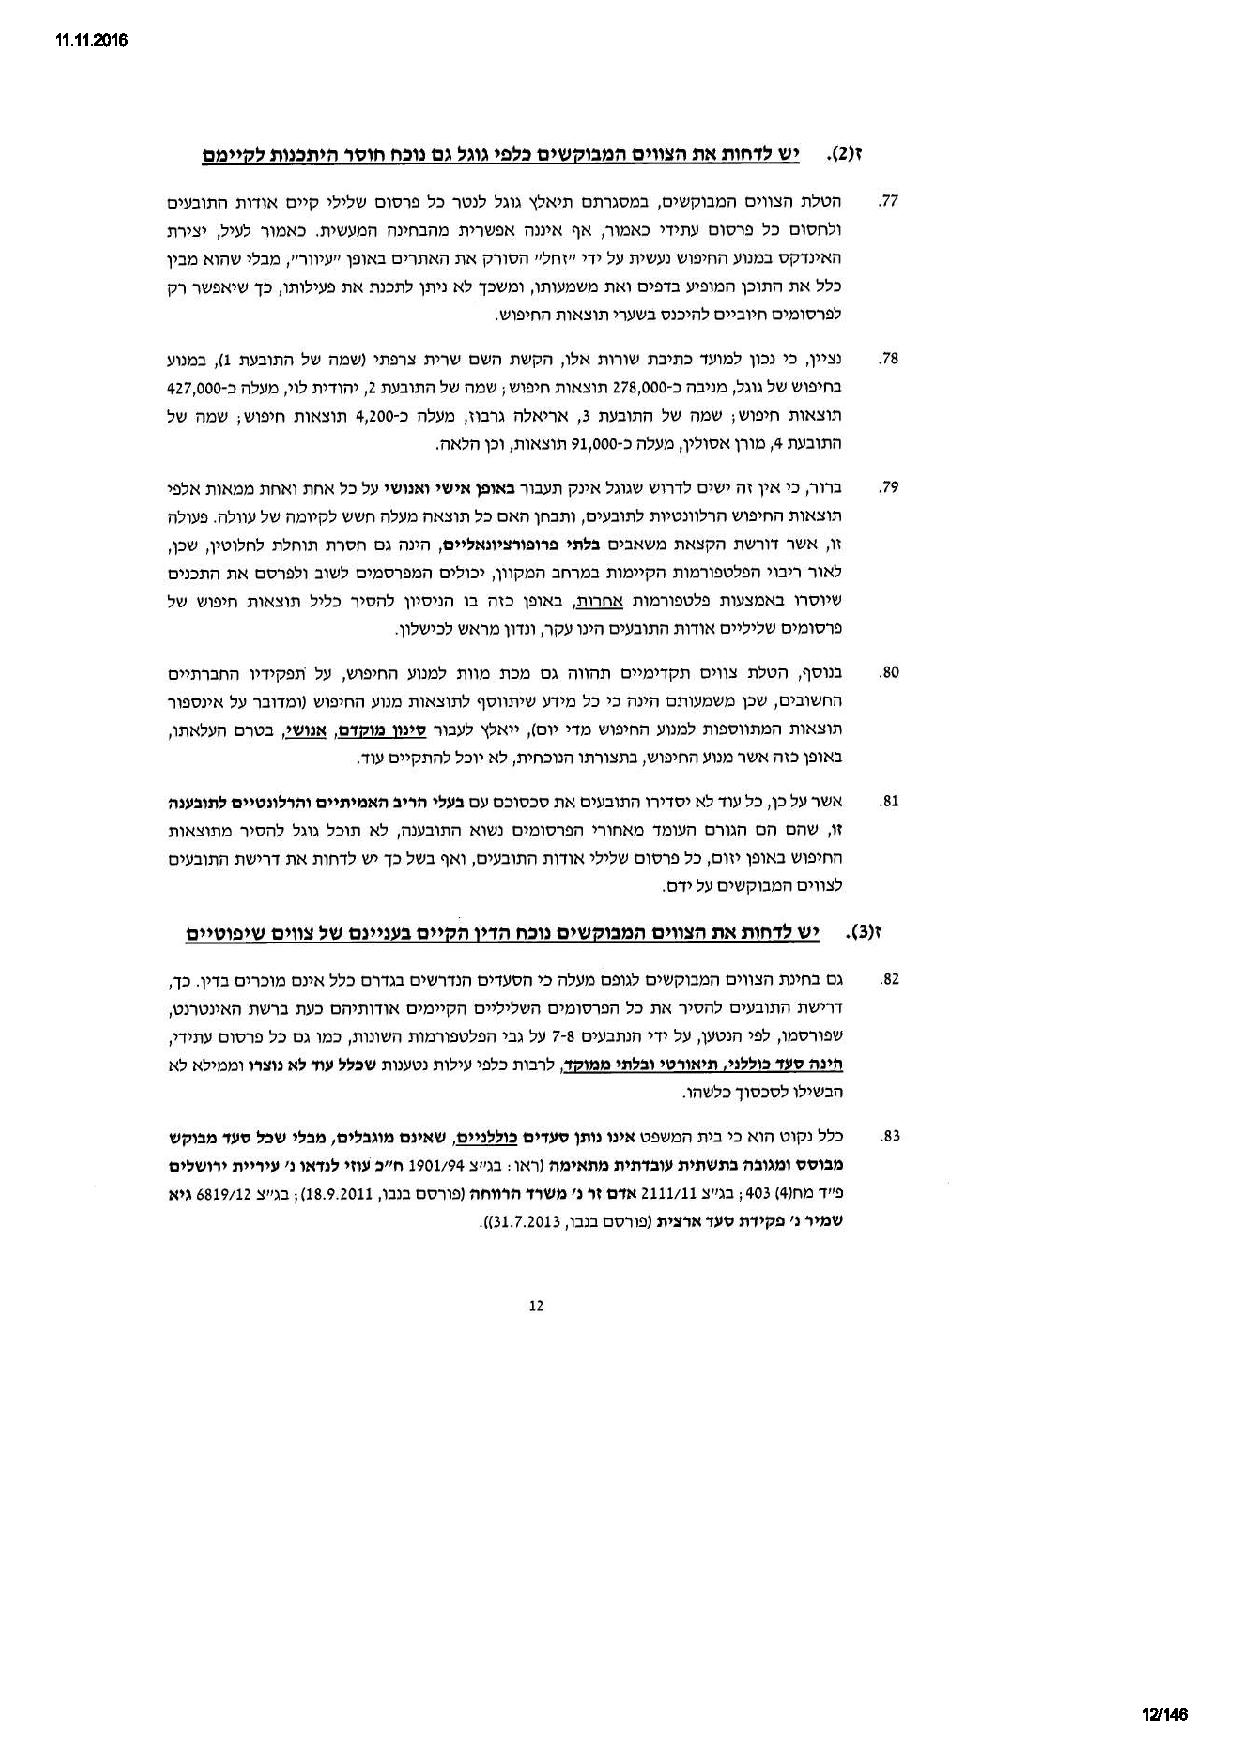 document-page-012